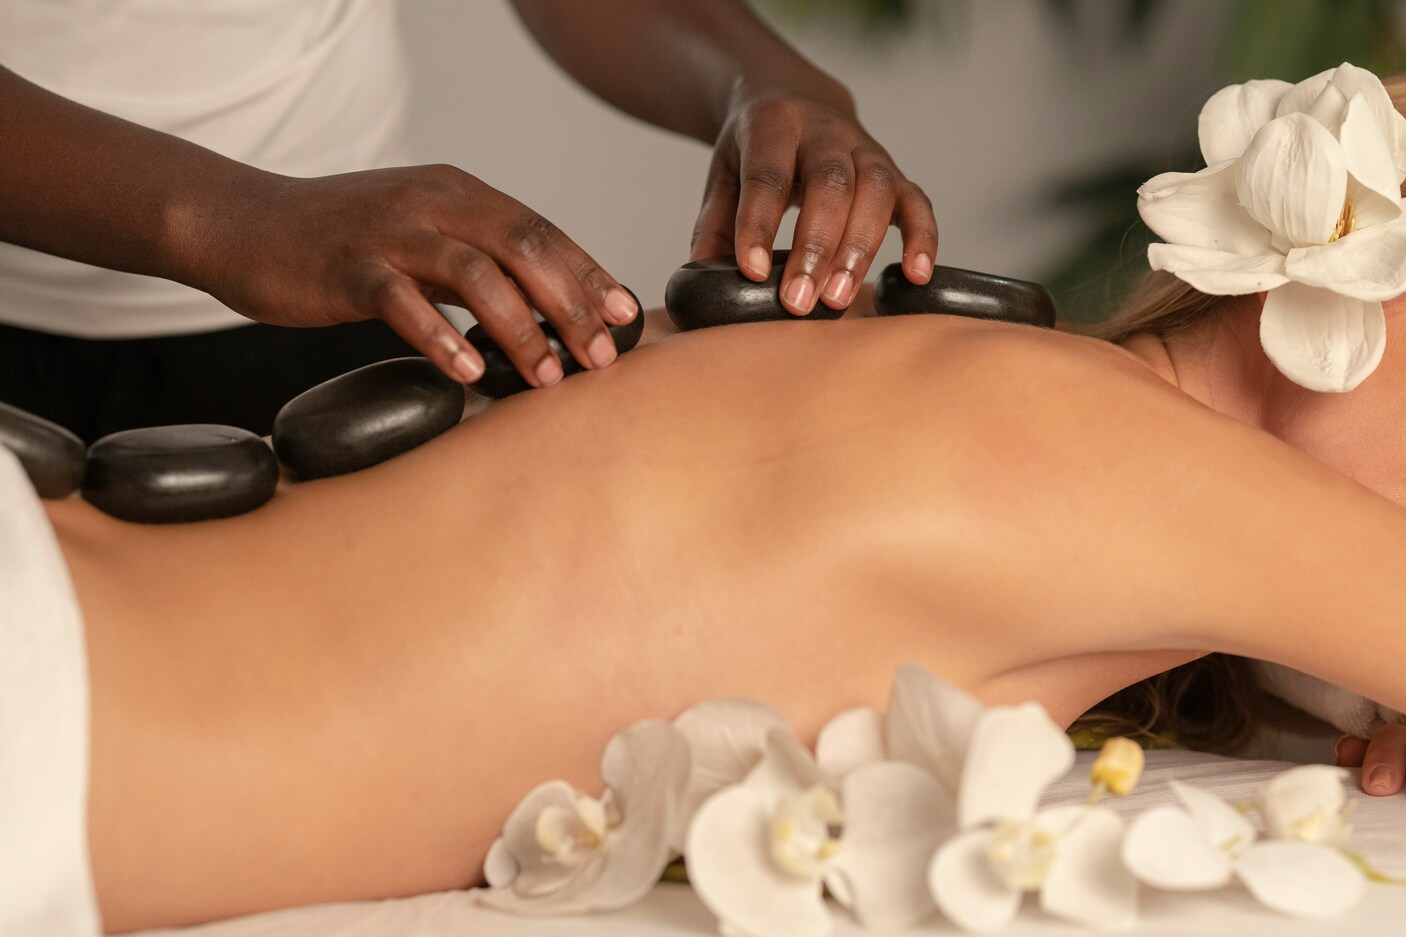 relaxing massages are another of the incredible experiences in Mykonos